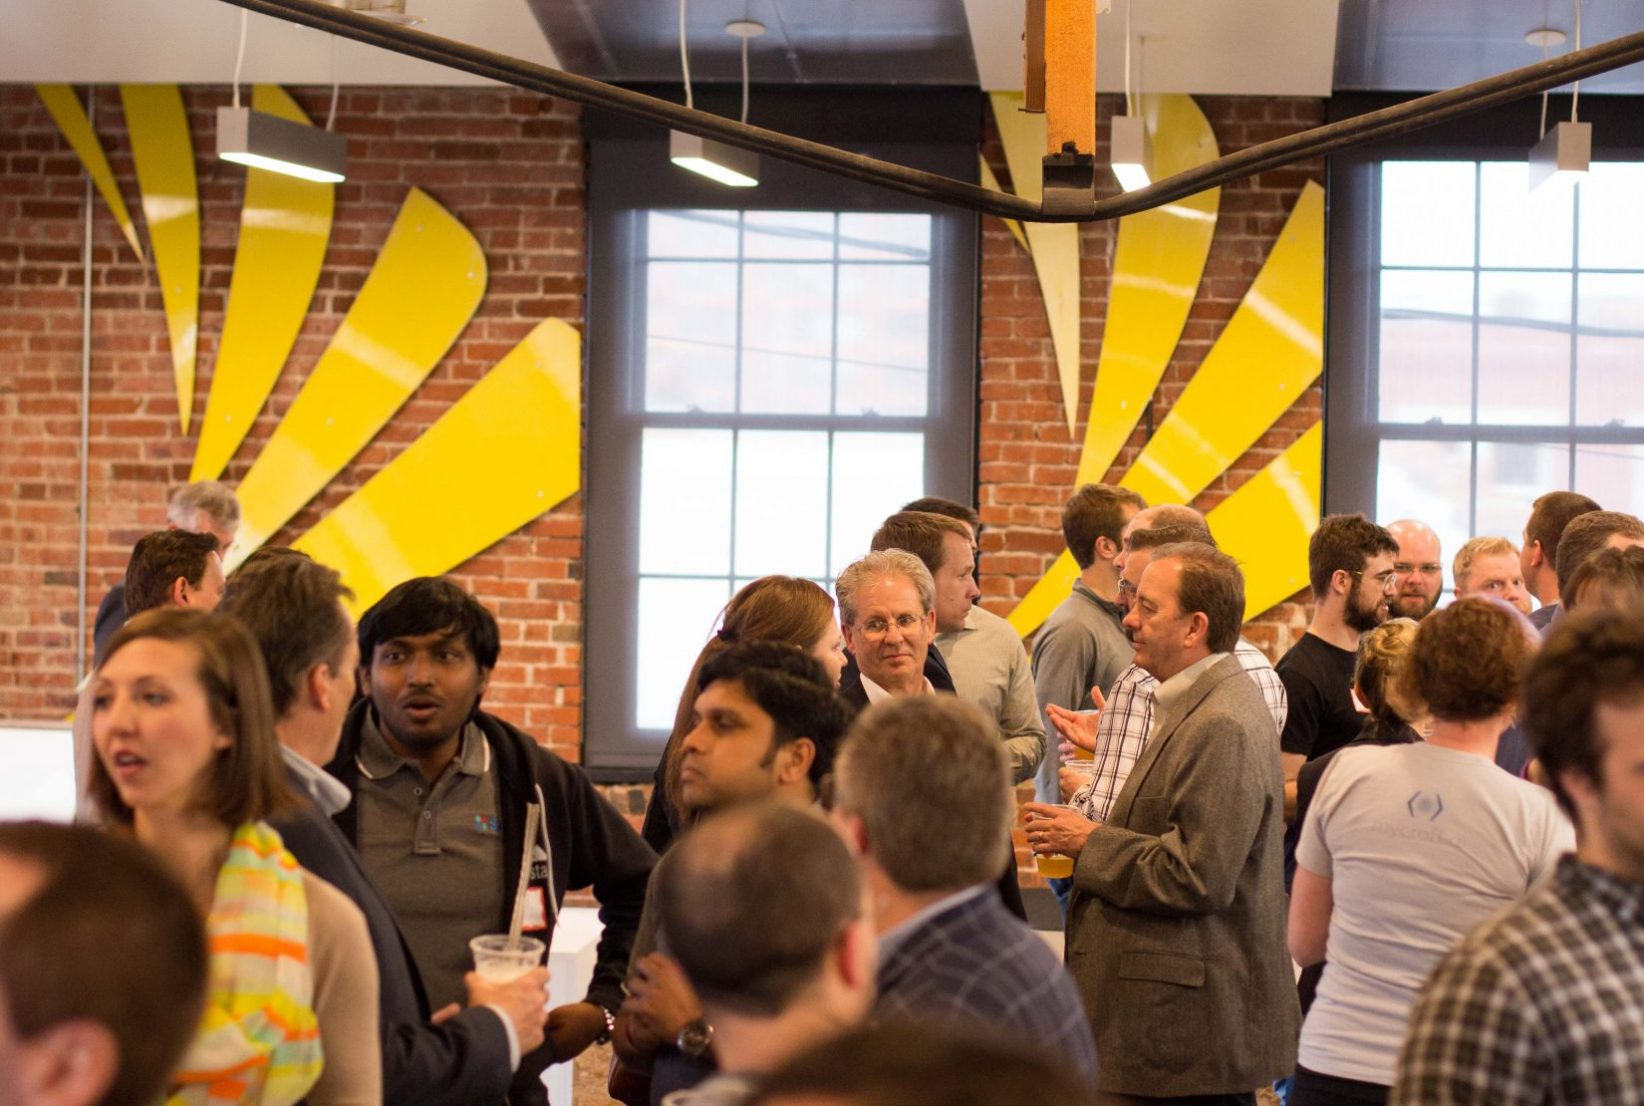 Sprint Mentor Network triples its impact with local startups